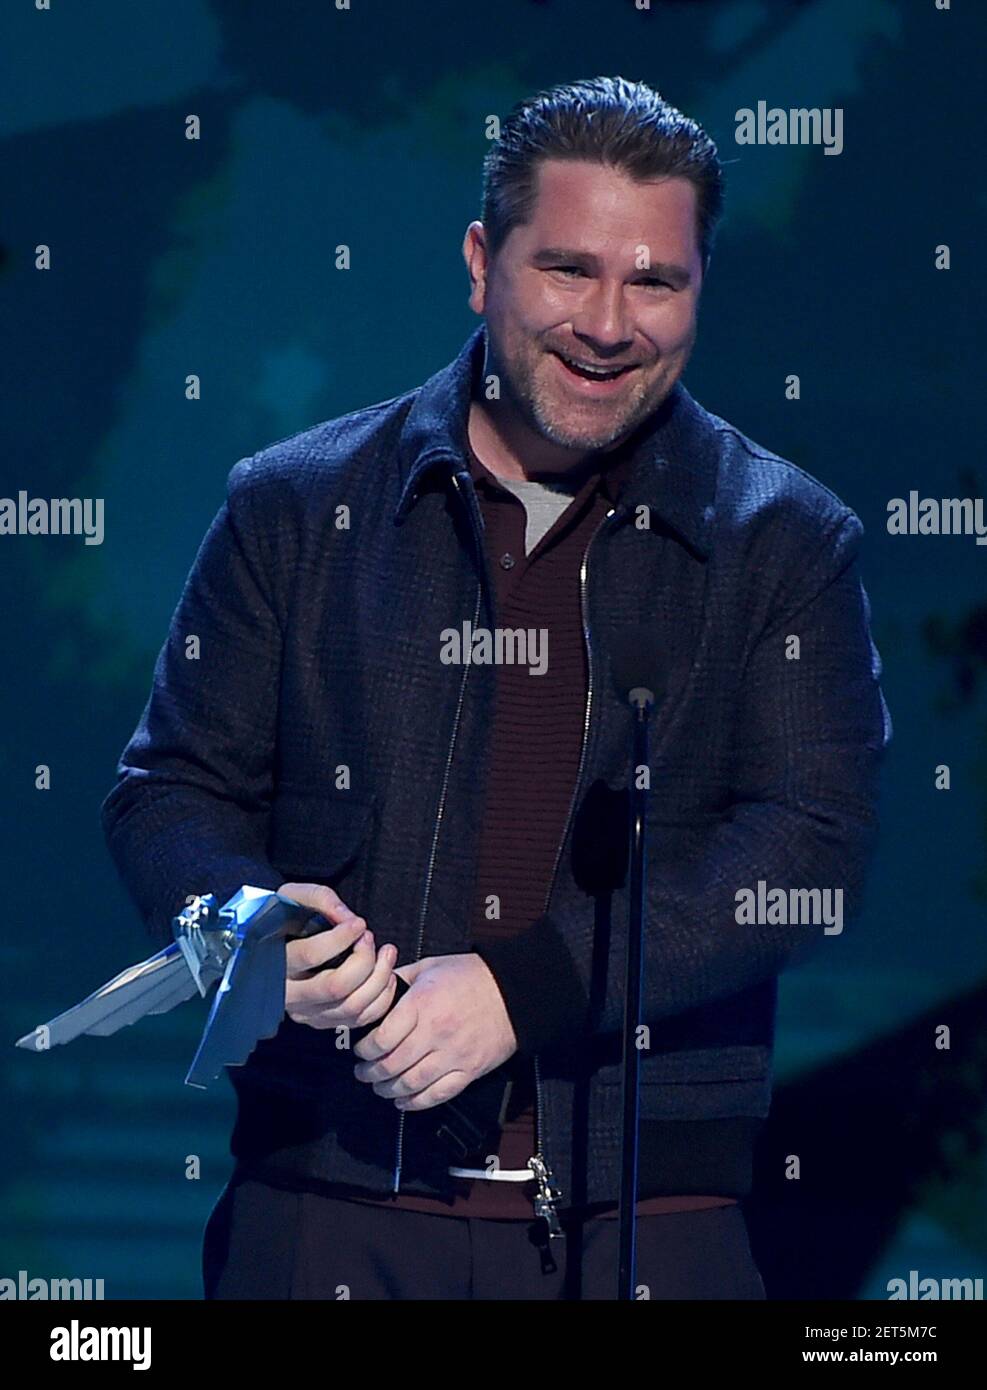 LOS - DECEMBER 6: Roger accepts the Best Performance award for “Red Dead Redemption 2” at the 2018 Game at the Microsoft Theater on December 6, 2018 in Los